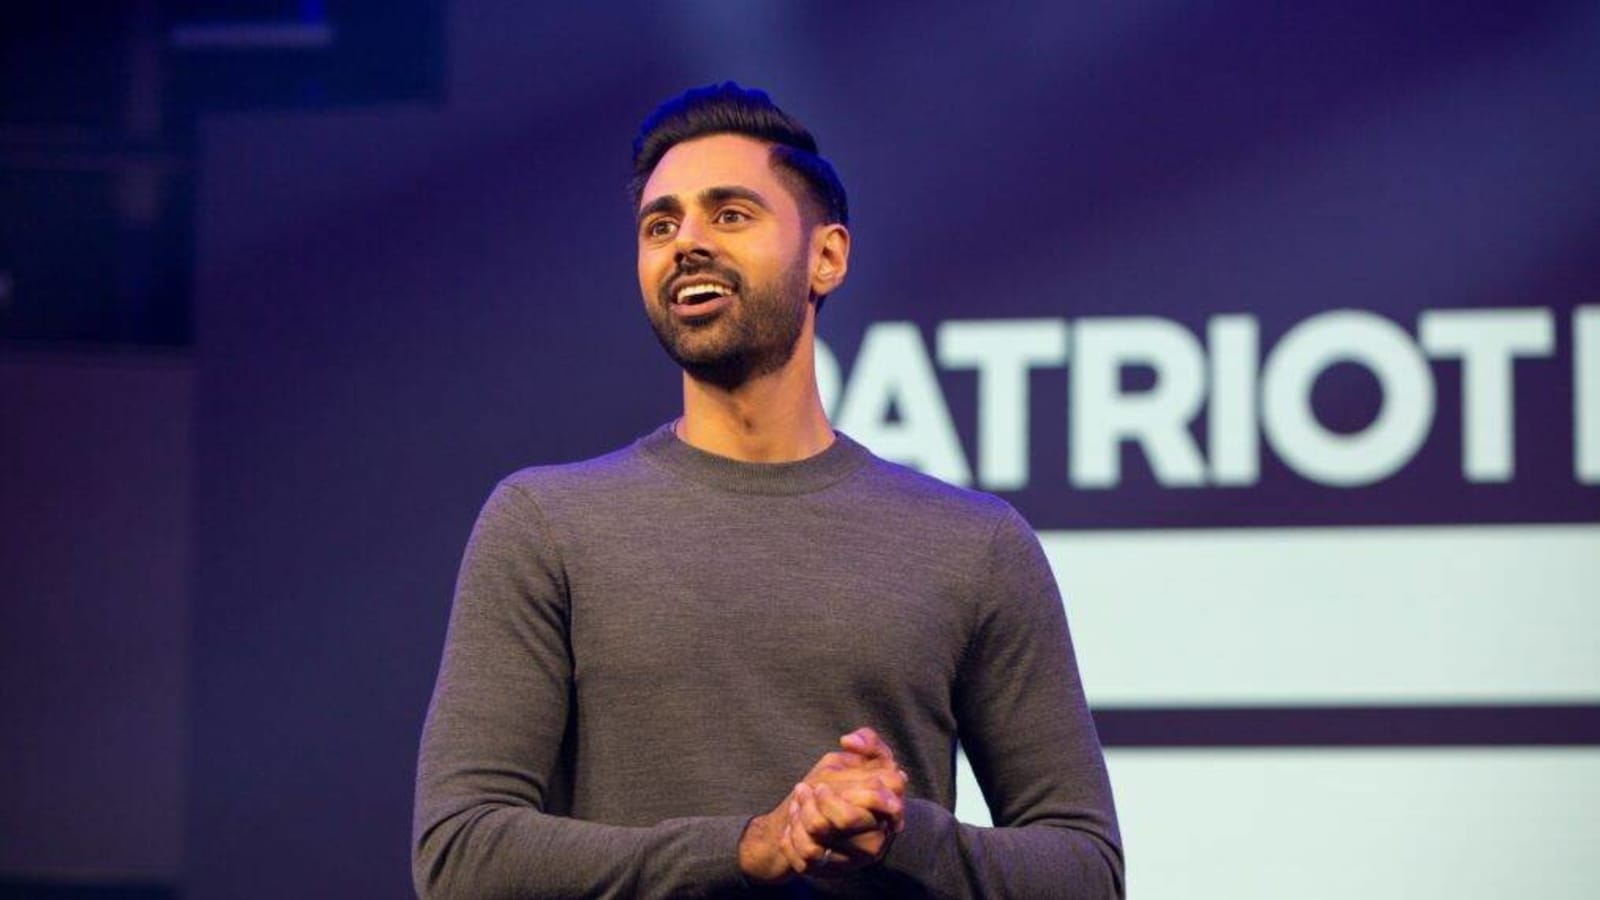 Hasan Minhaj Might Take Over as ‘Daily Show’ Host After Trevor Noah’s Exit